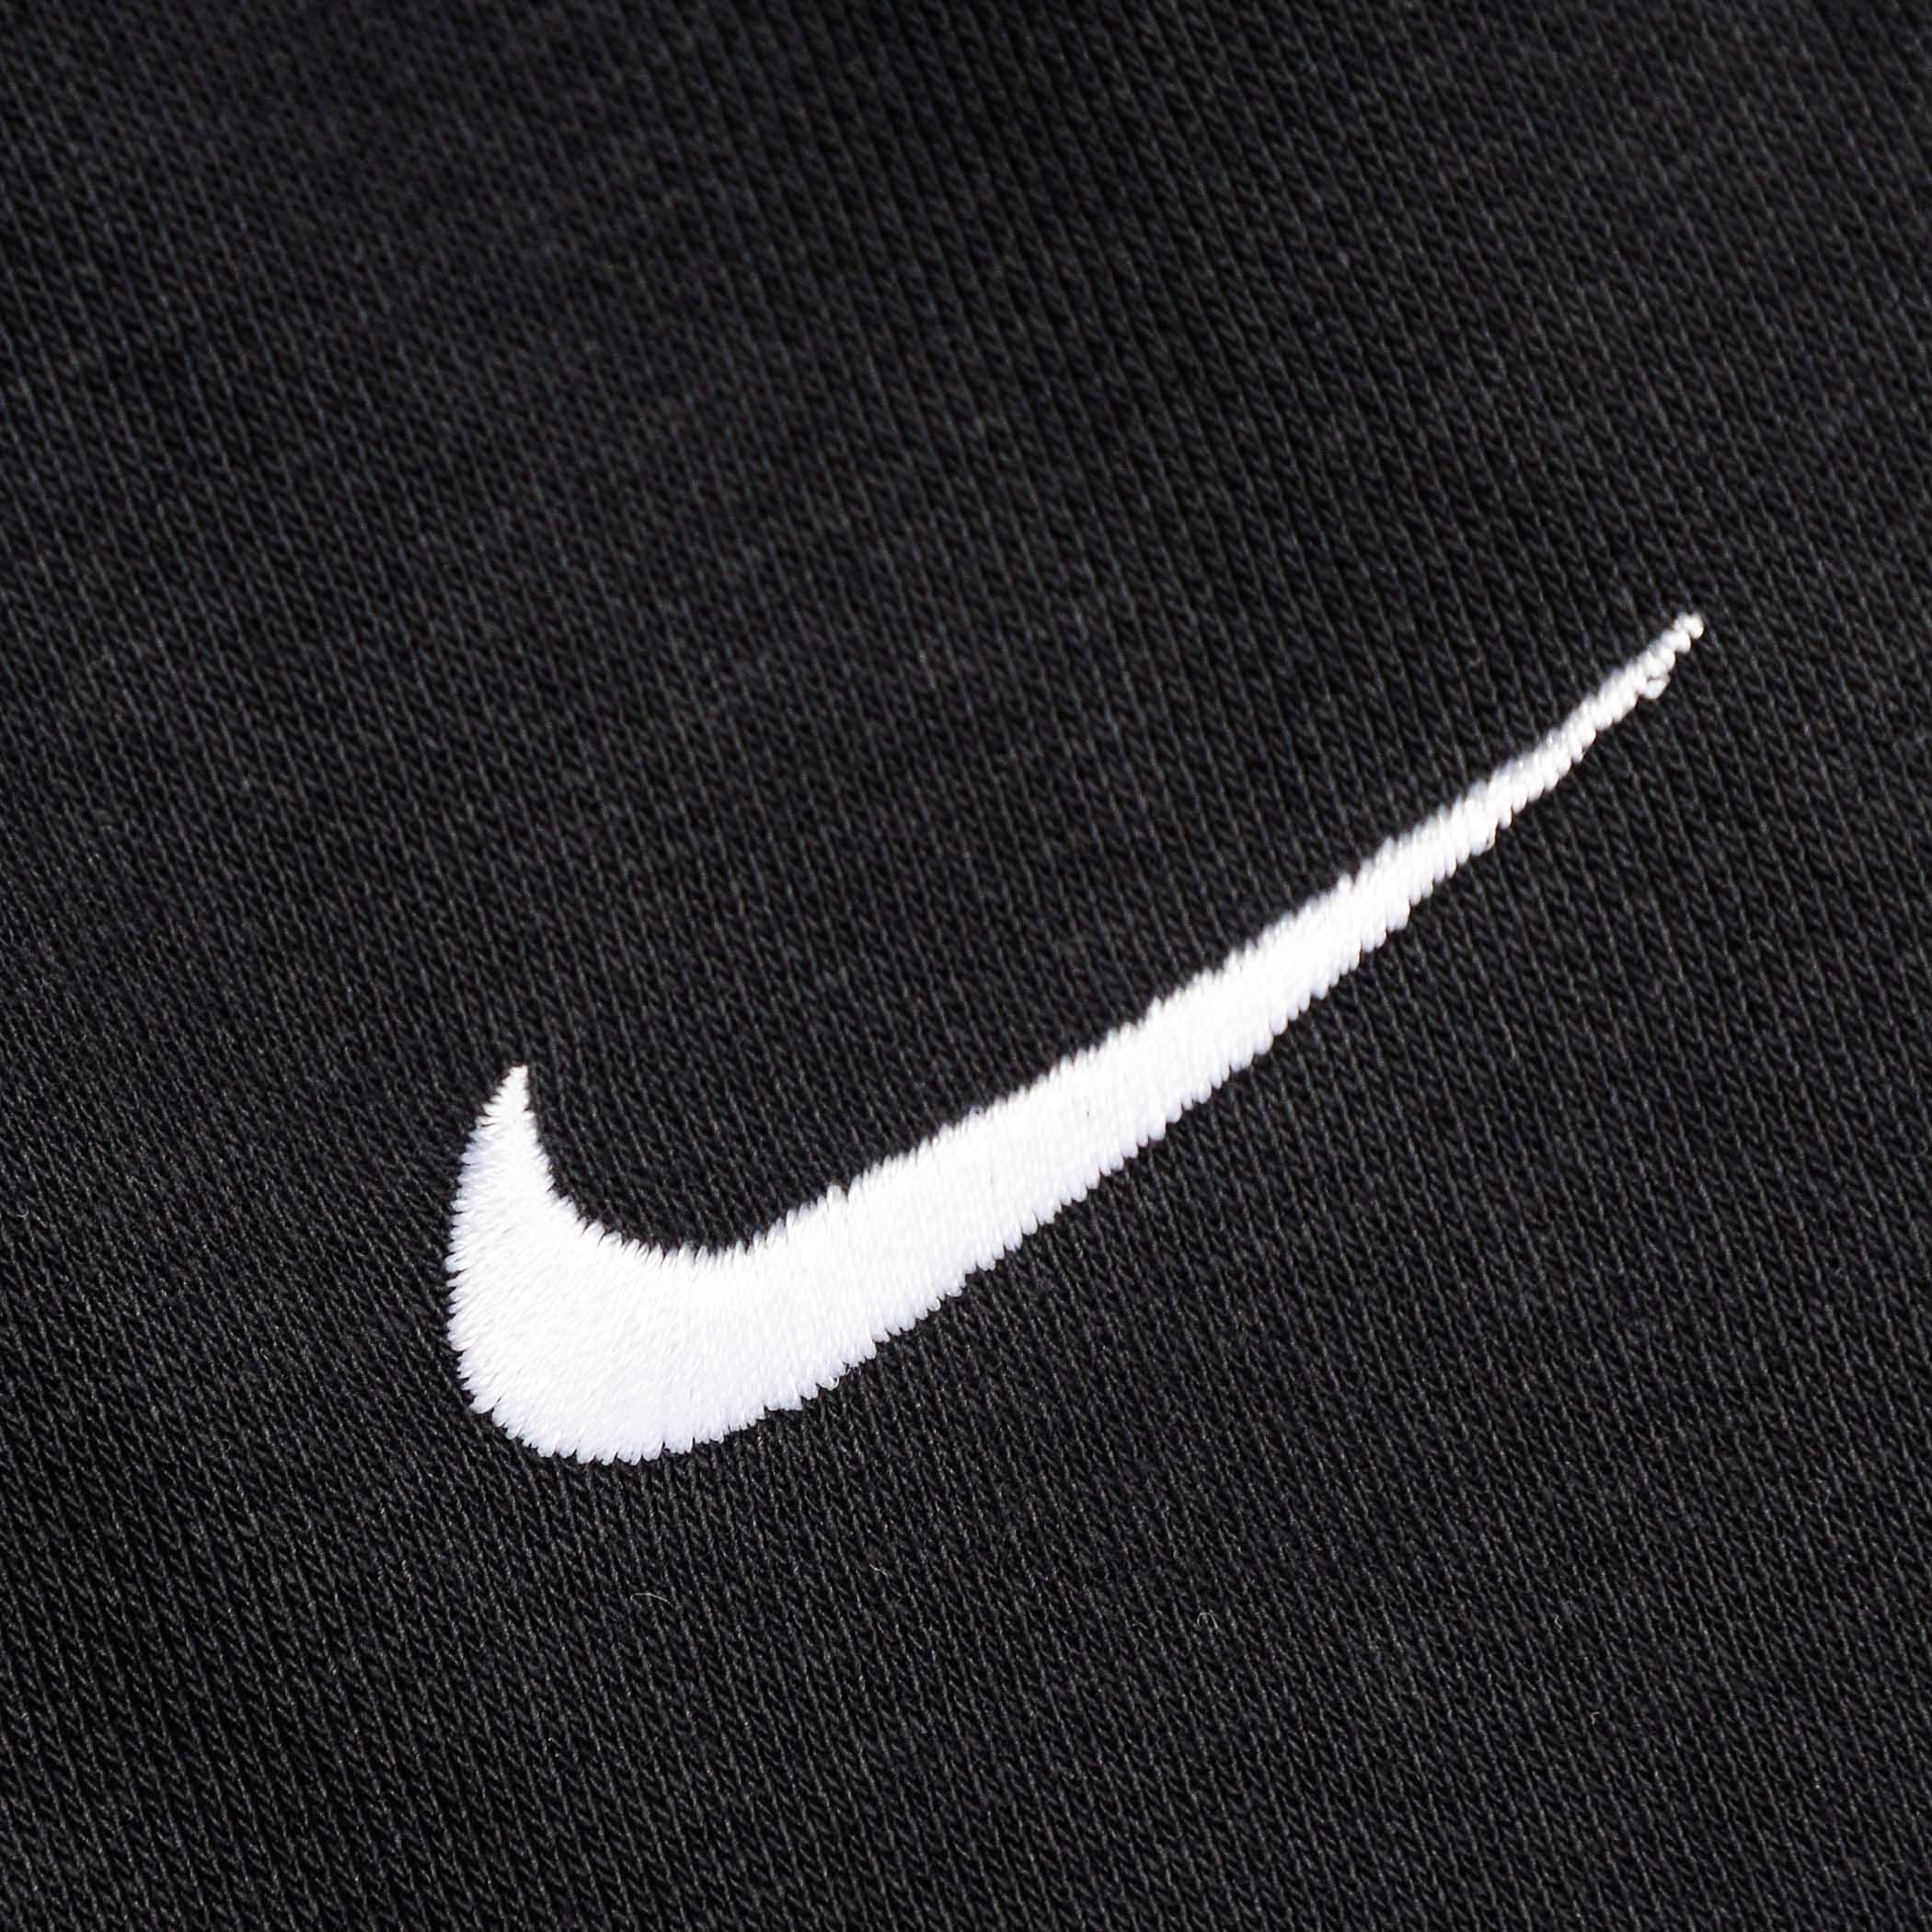 Nike Sportswear Essential Collection